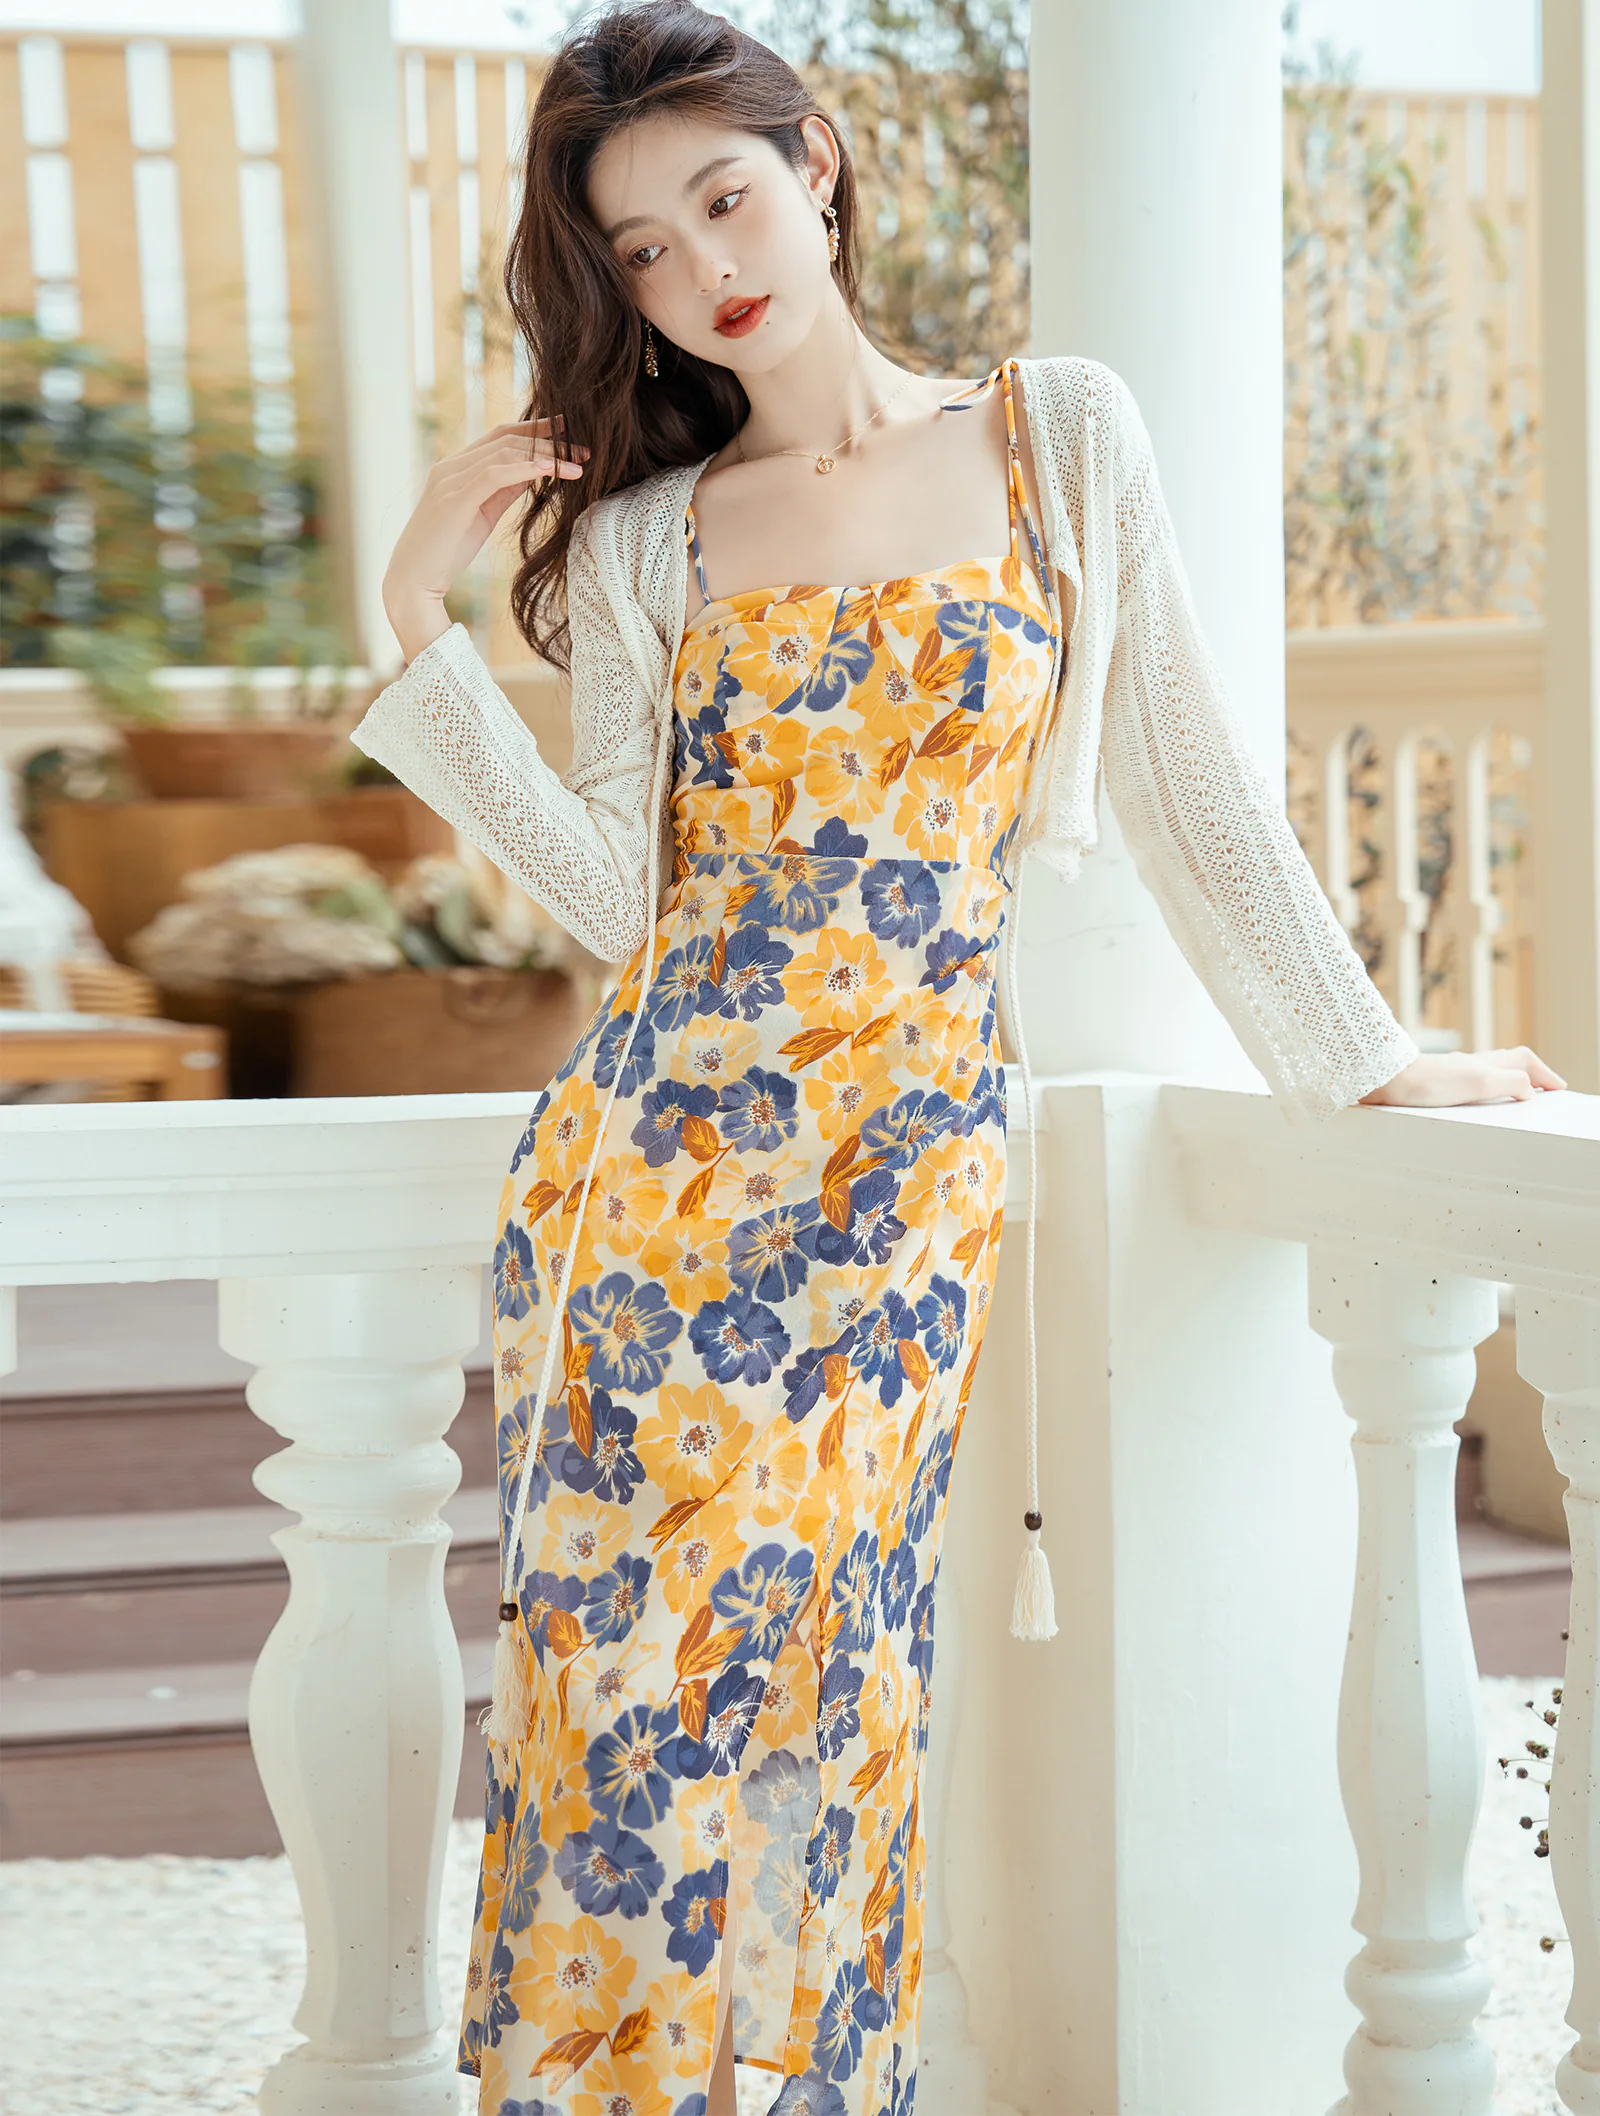 Sweet Floral Printed Yellow Summer Beach Slip Dress with Knit Cardigan06